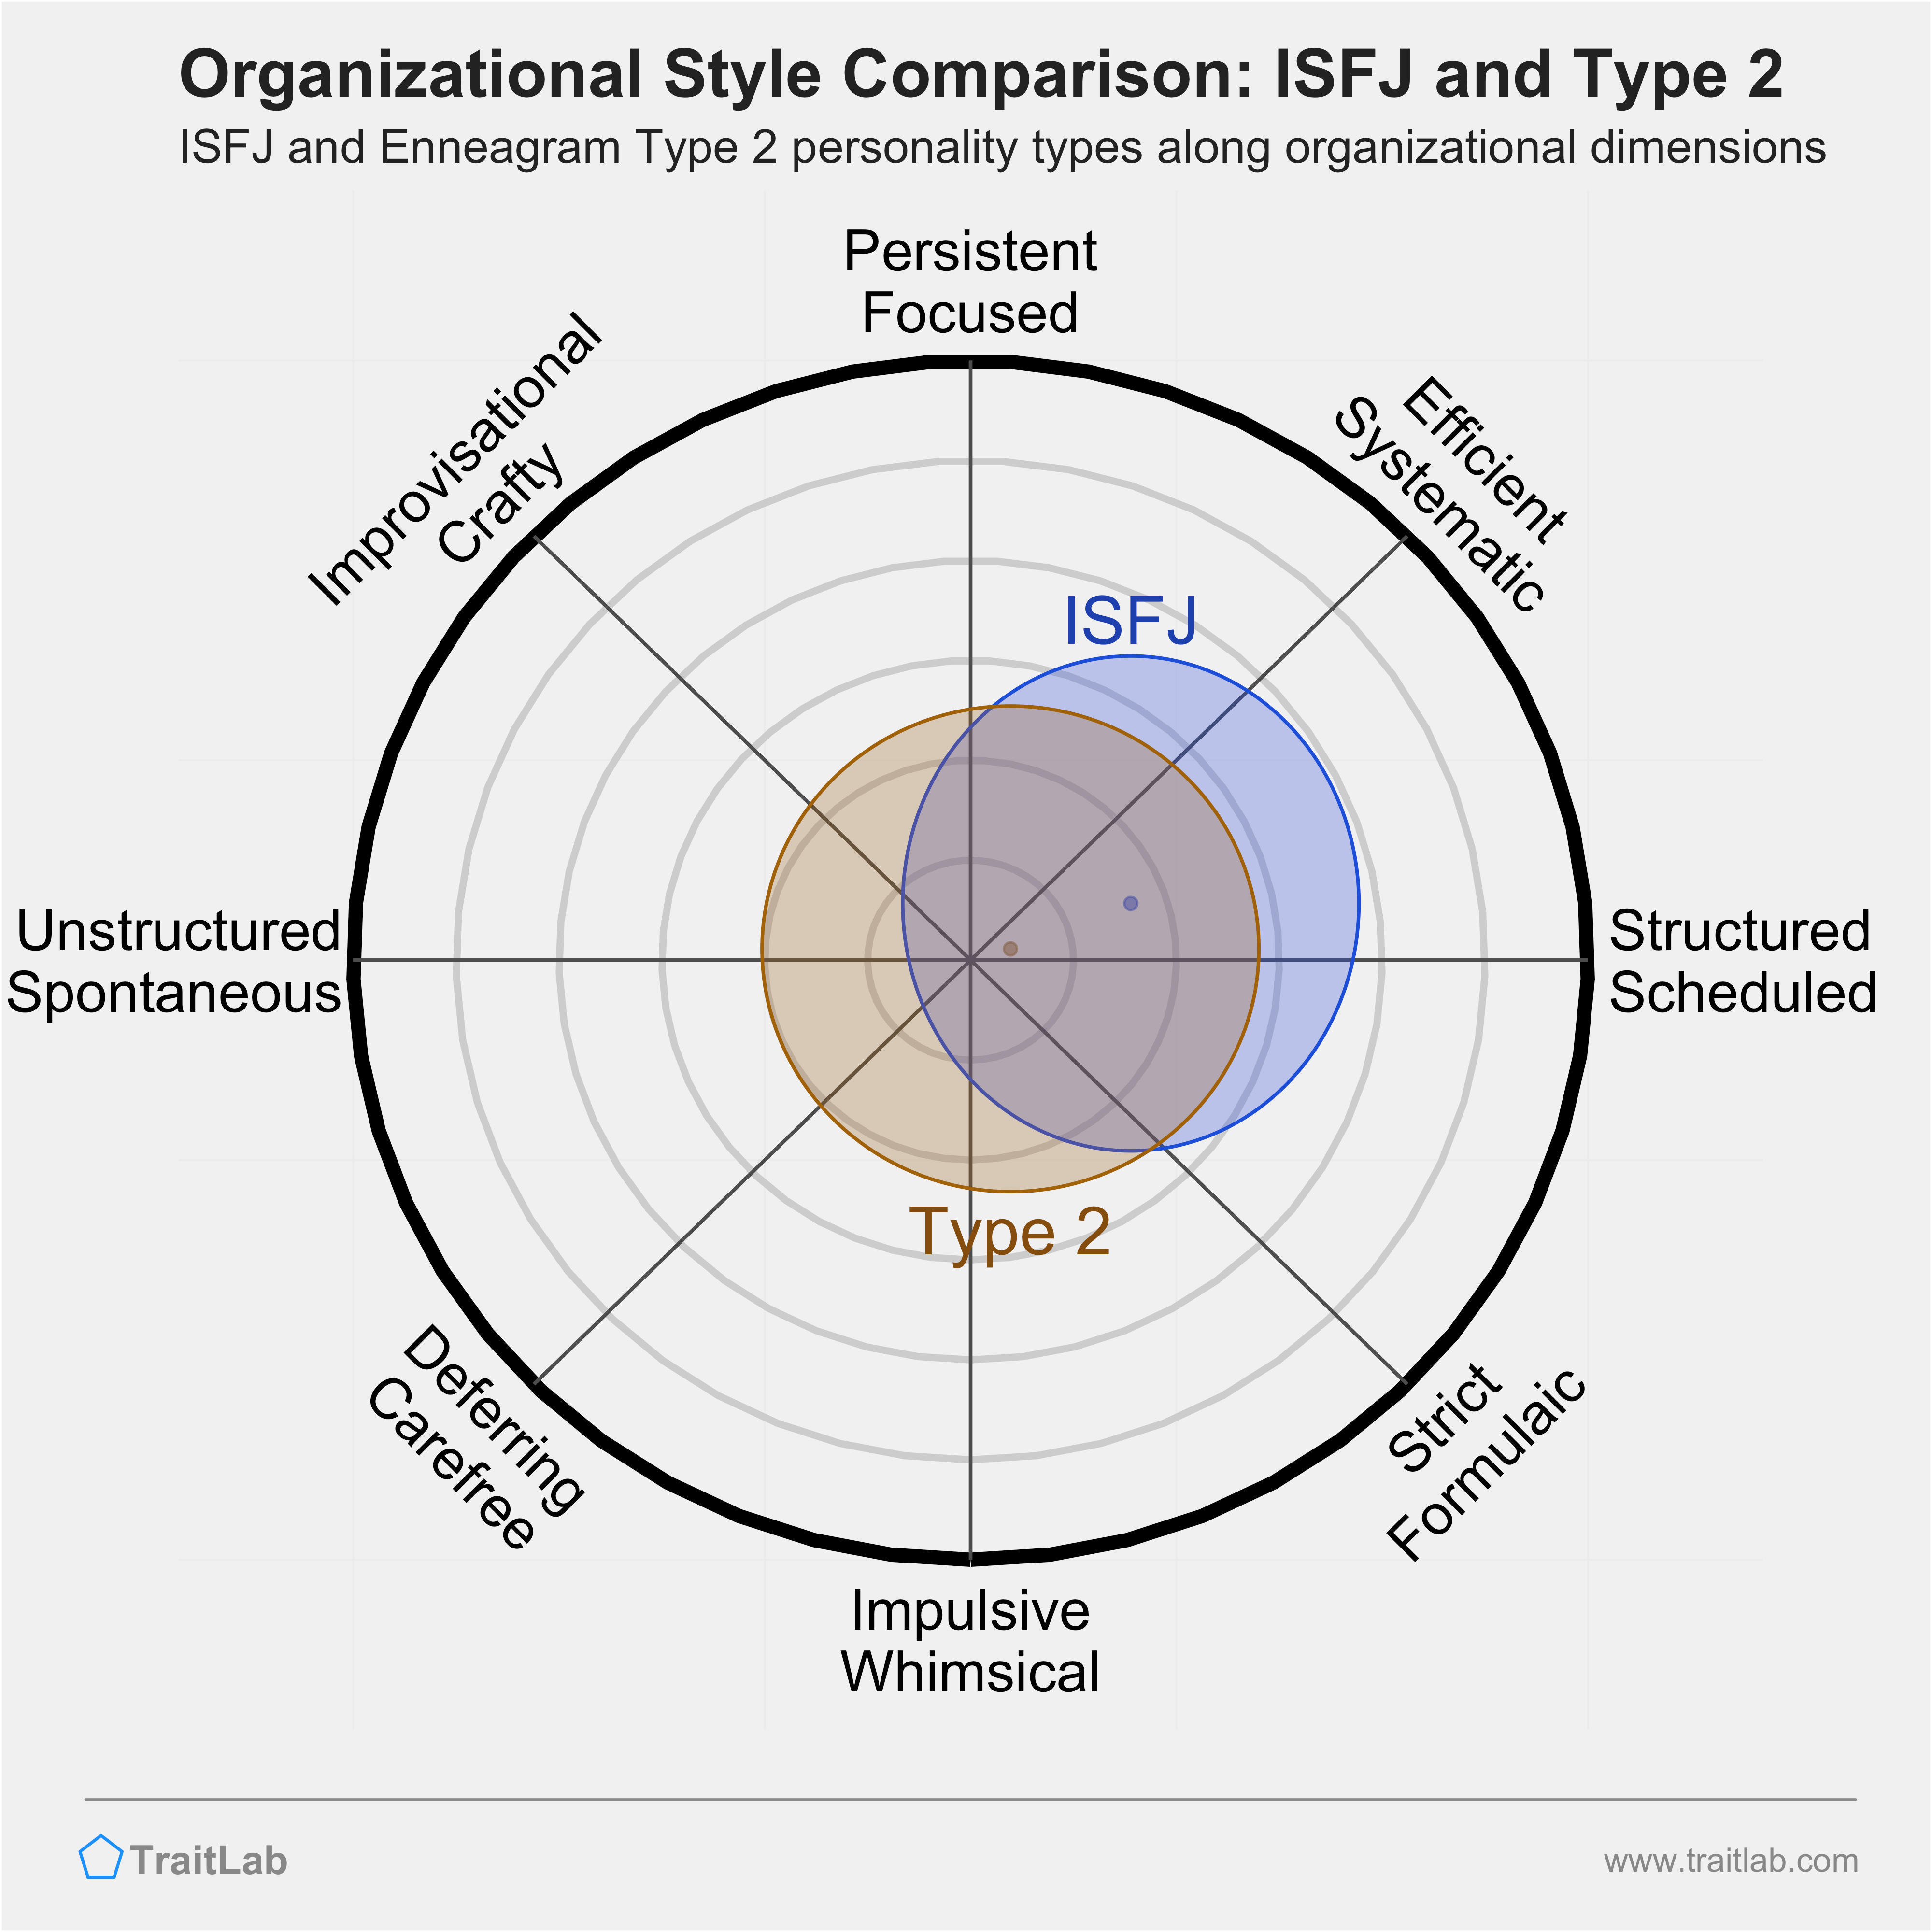 ISFJ and Type 2 comparison across organizational dimensions